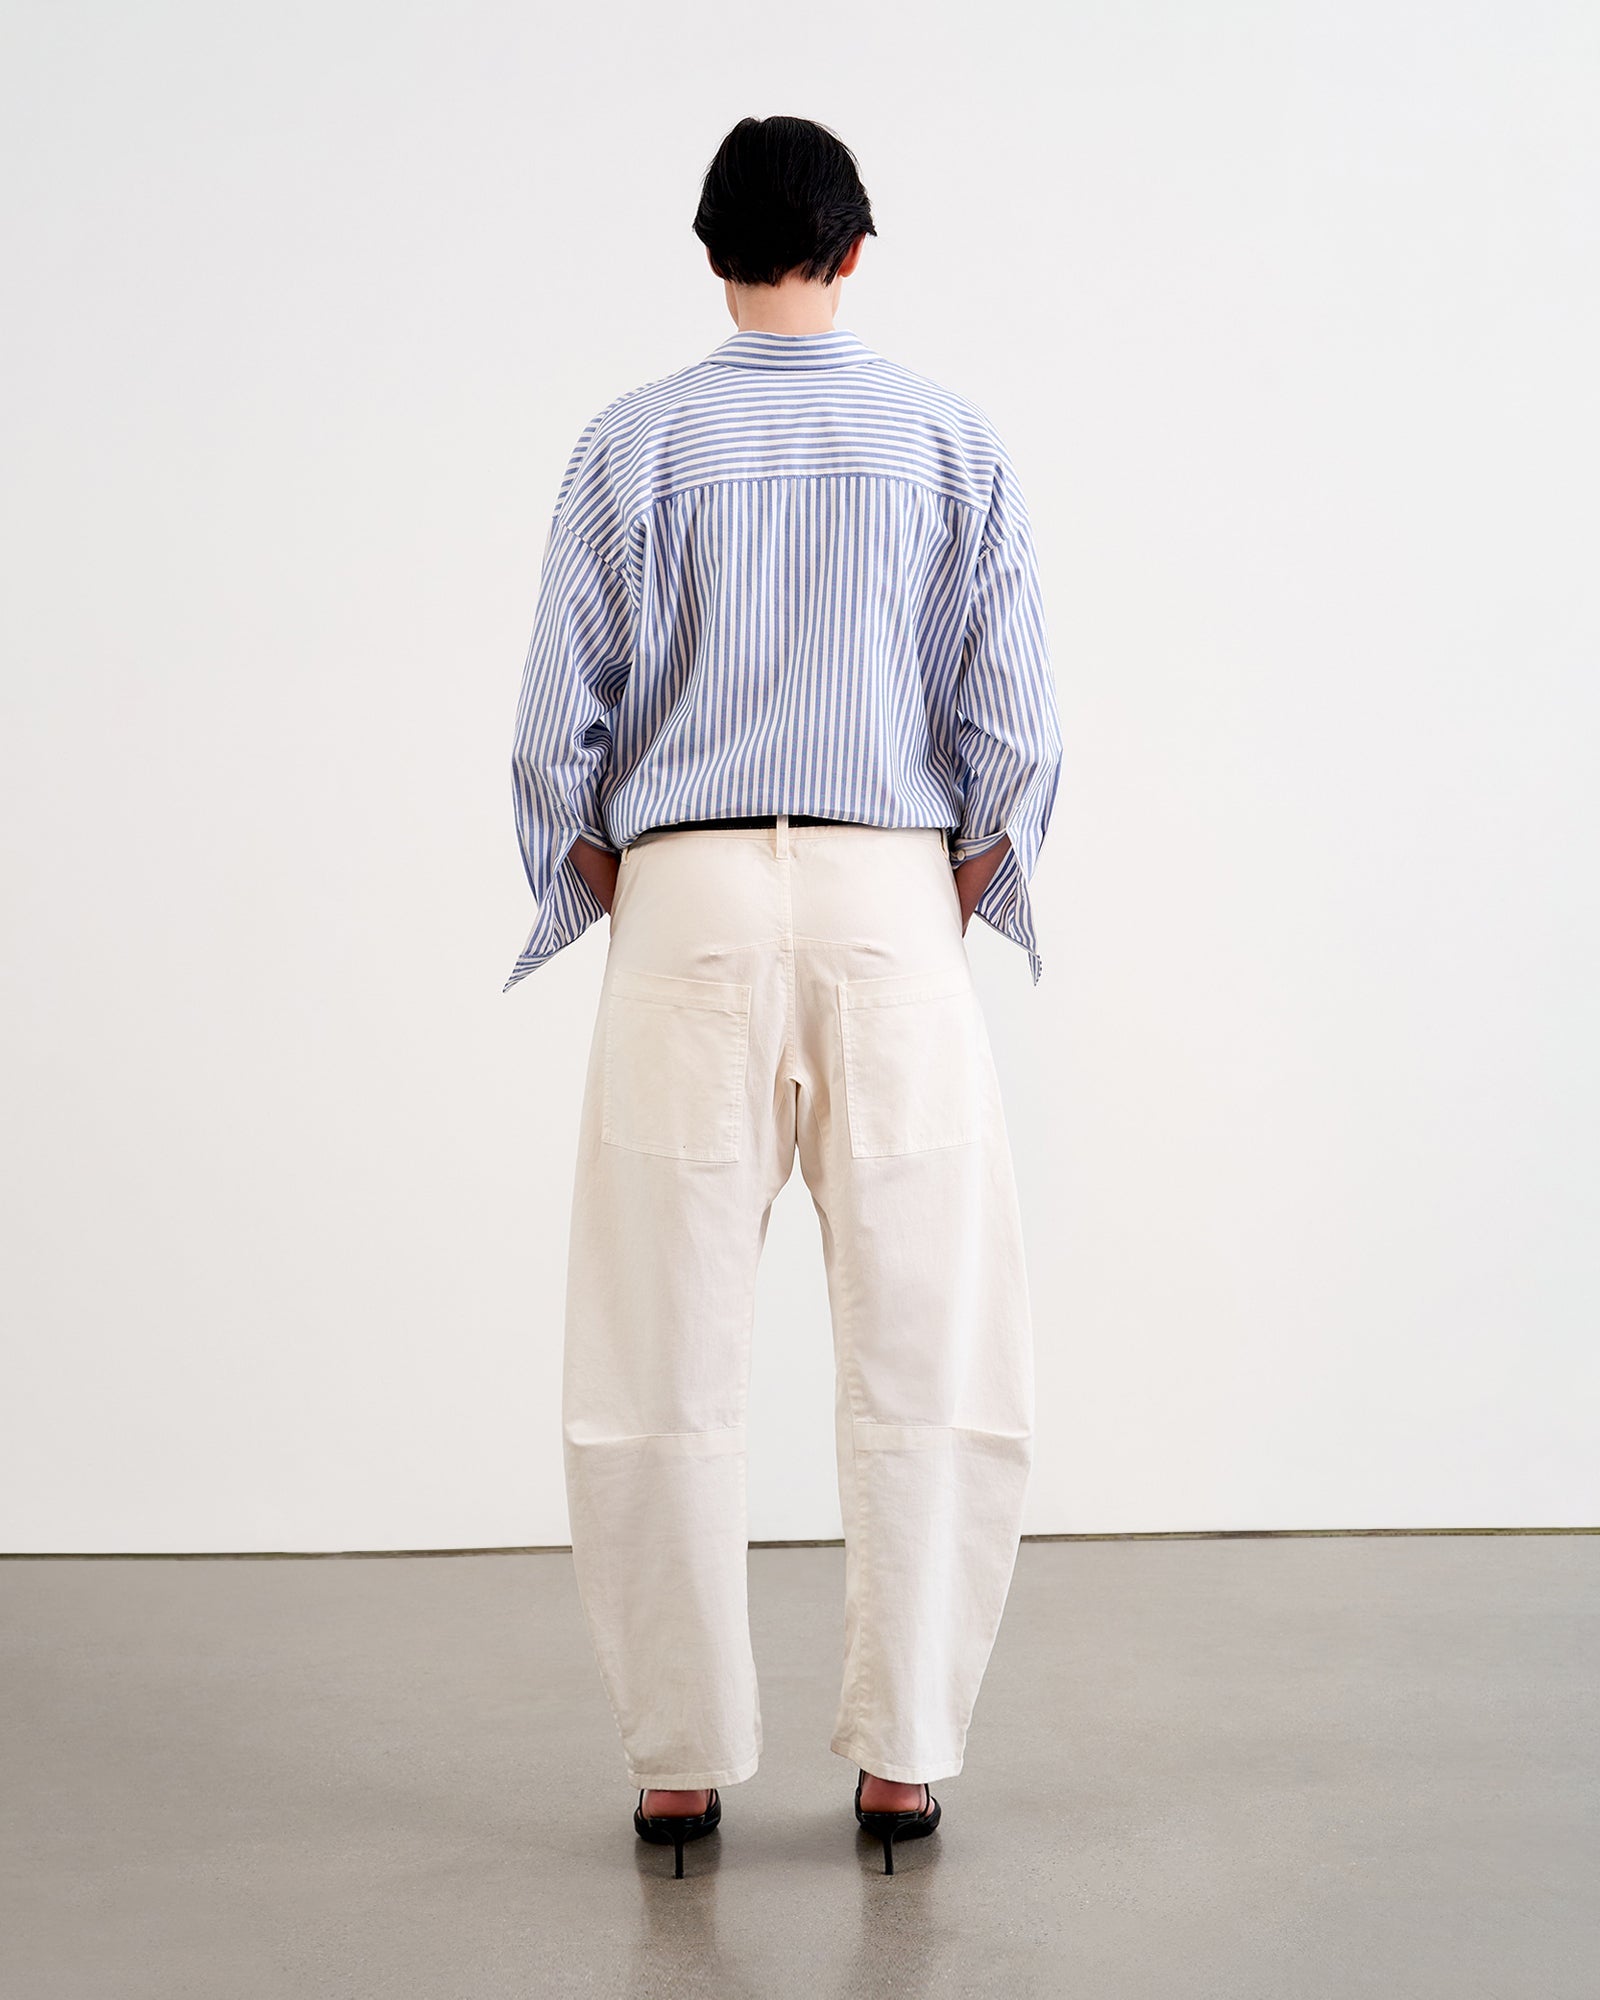 Nili Lotan Shon Pant in Eggshell from The New Trend